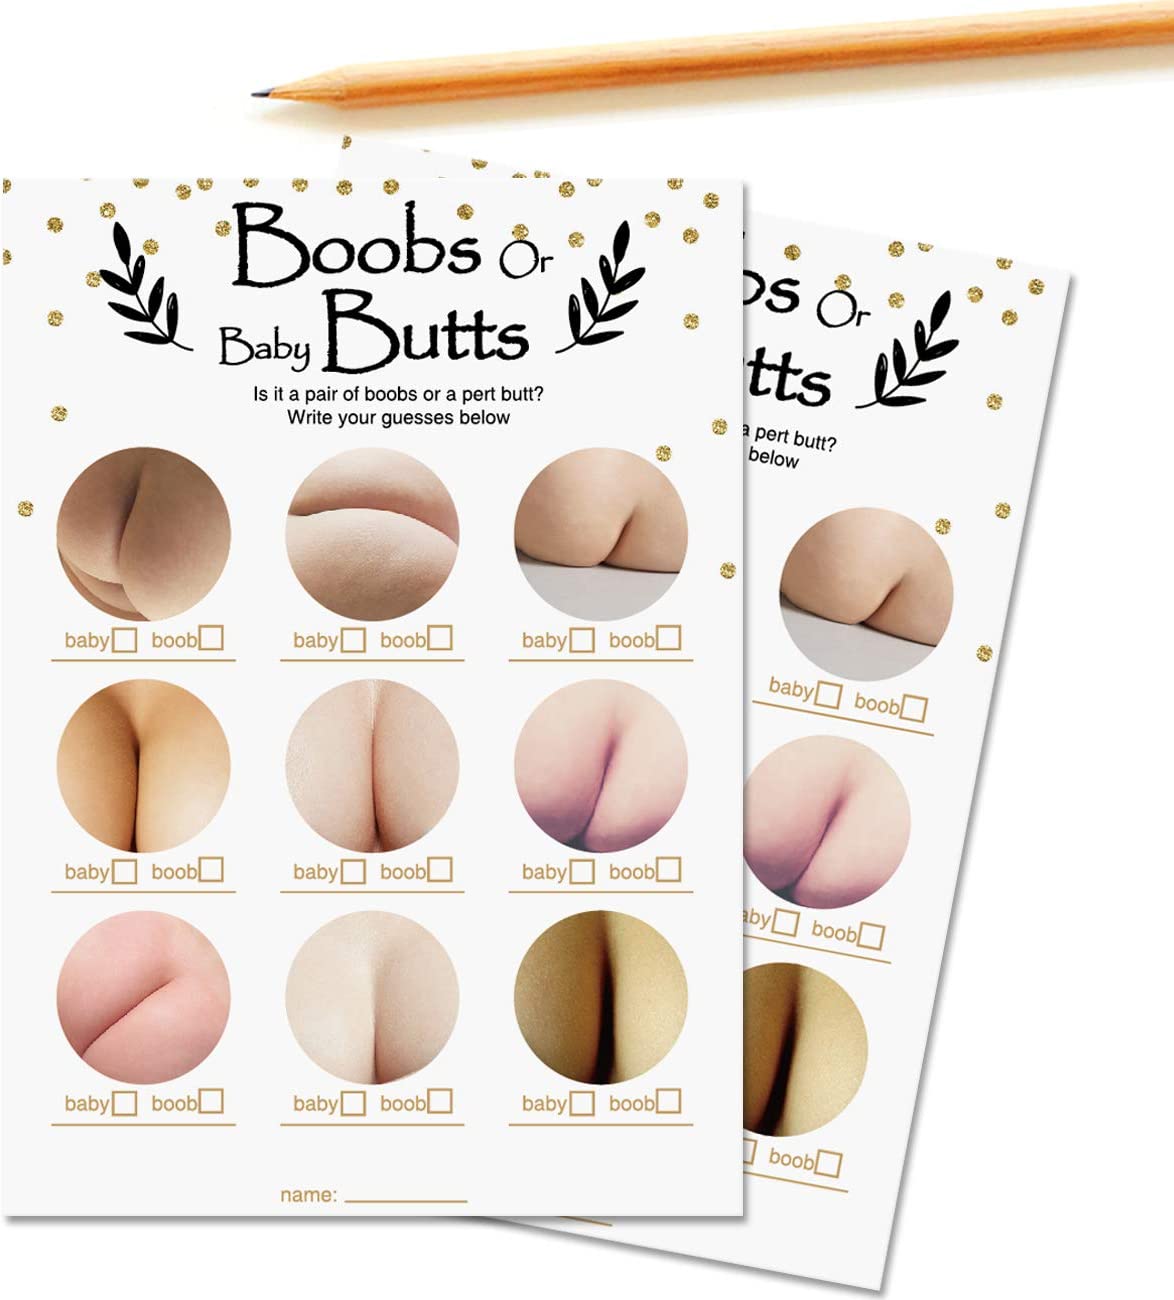 Boobs or Baby Butts Game